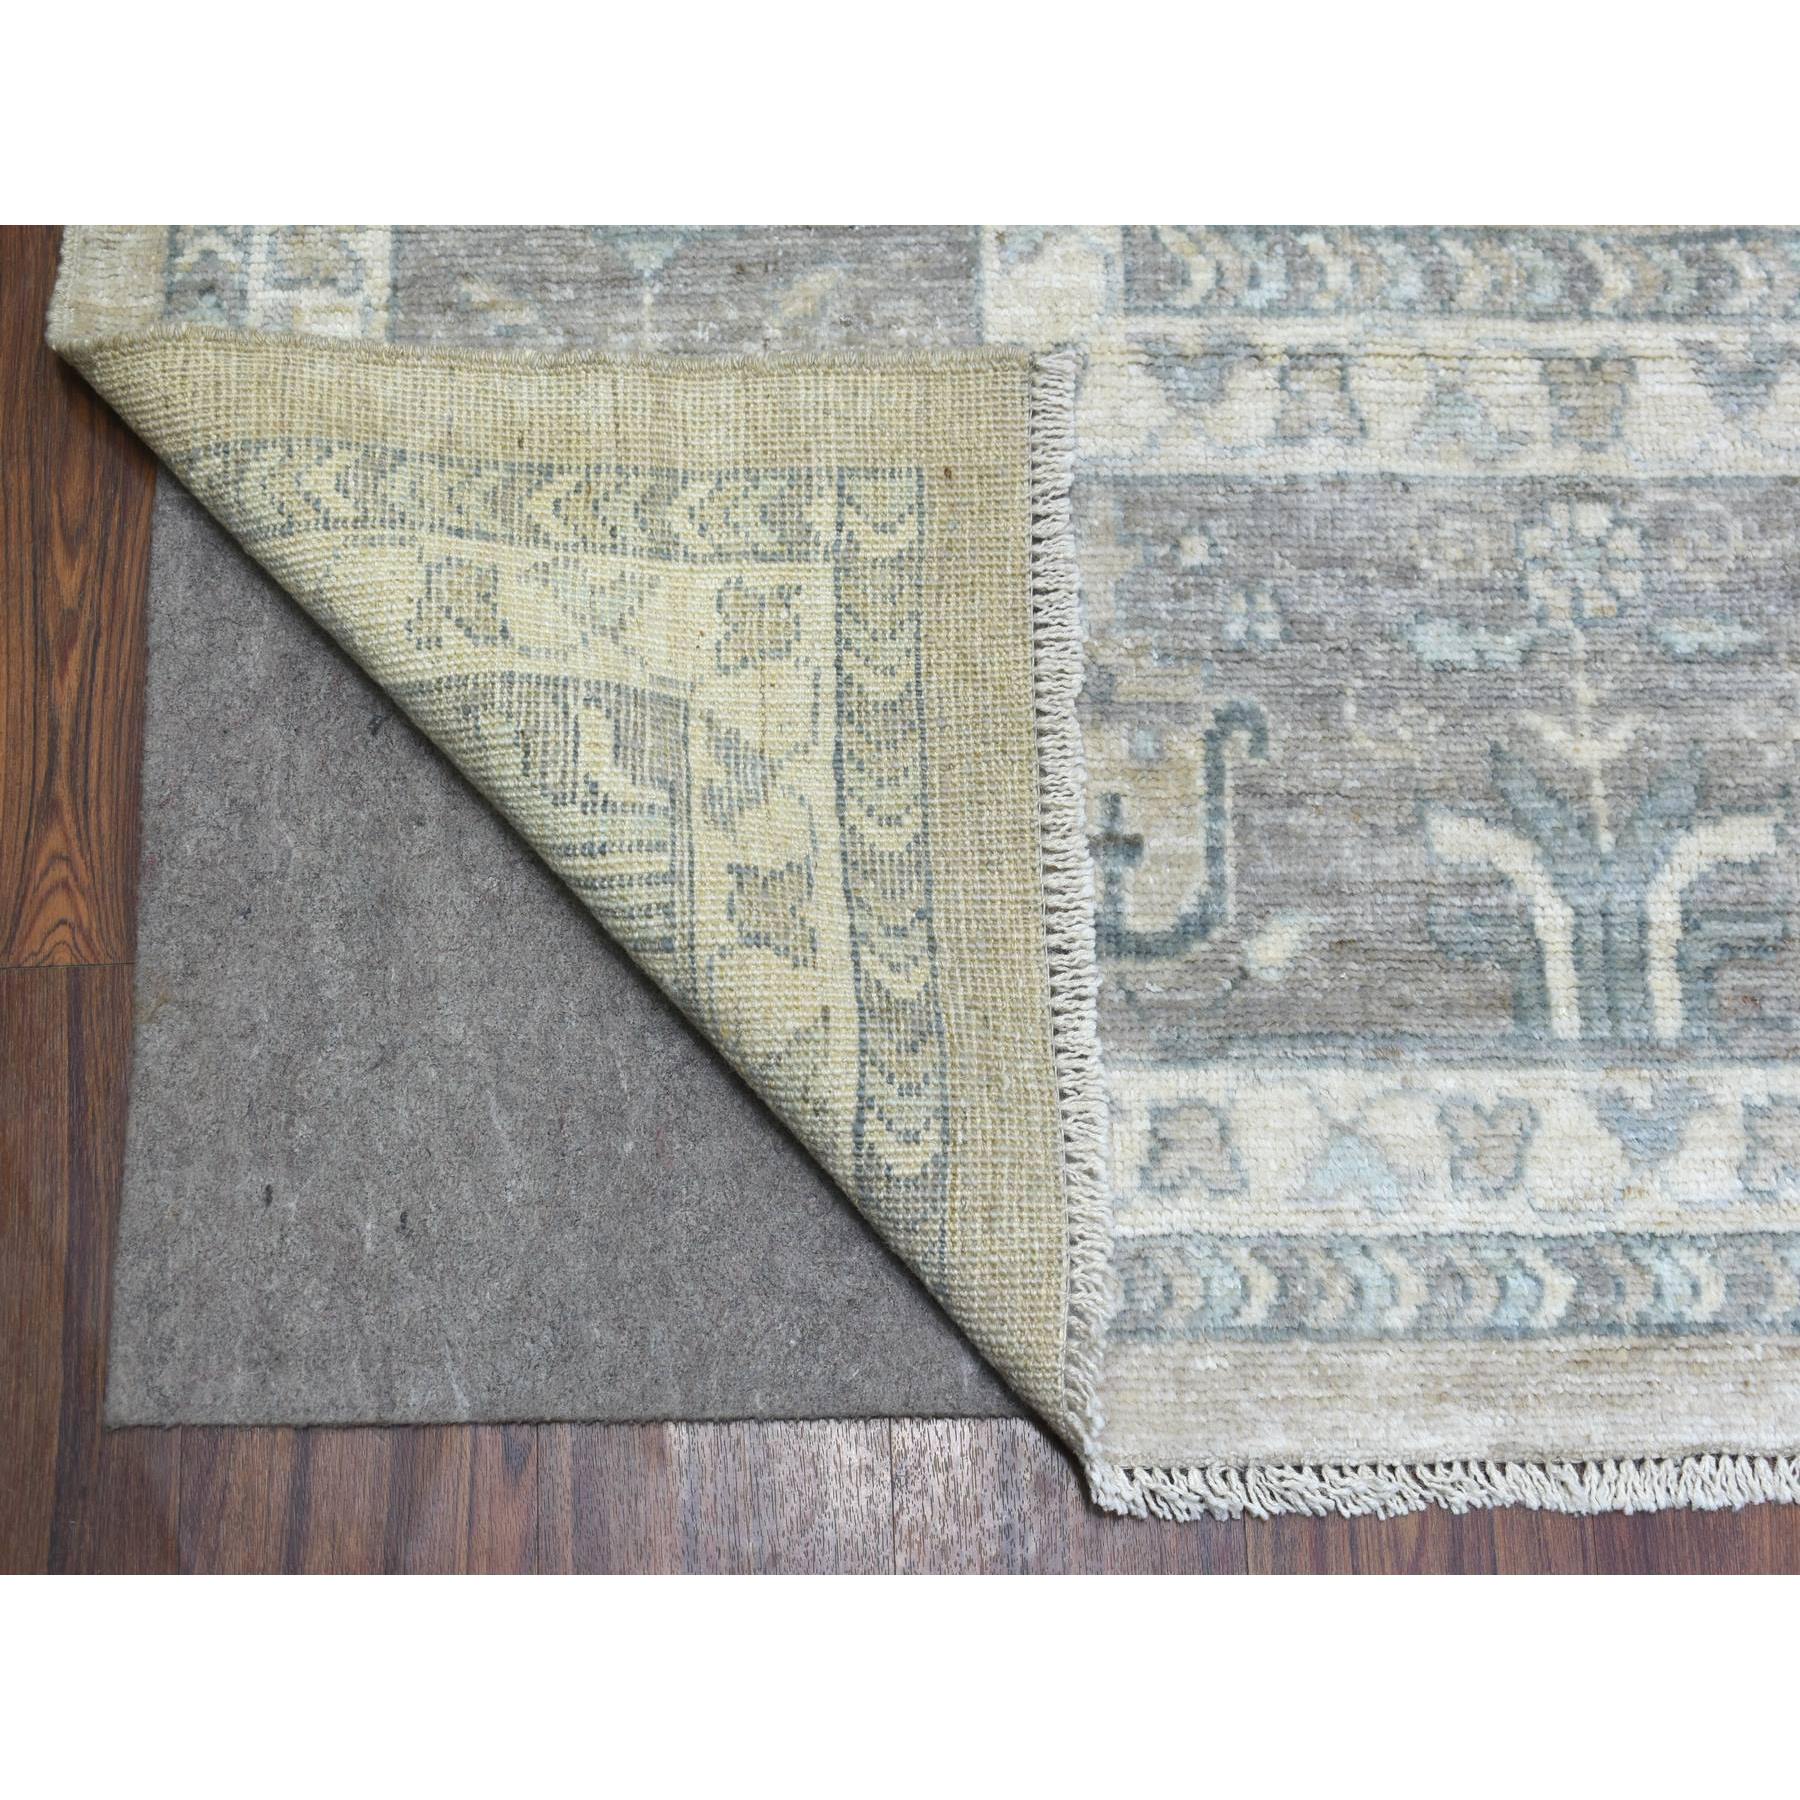 10'x10' Gray Afghan Angora Ushak with Willow and Cypress Tree Design Pure Wool Hand Woven Oriental Square Rug 